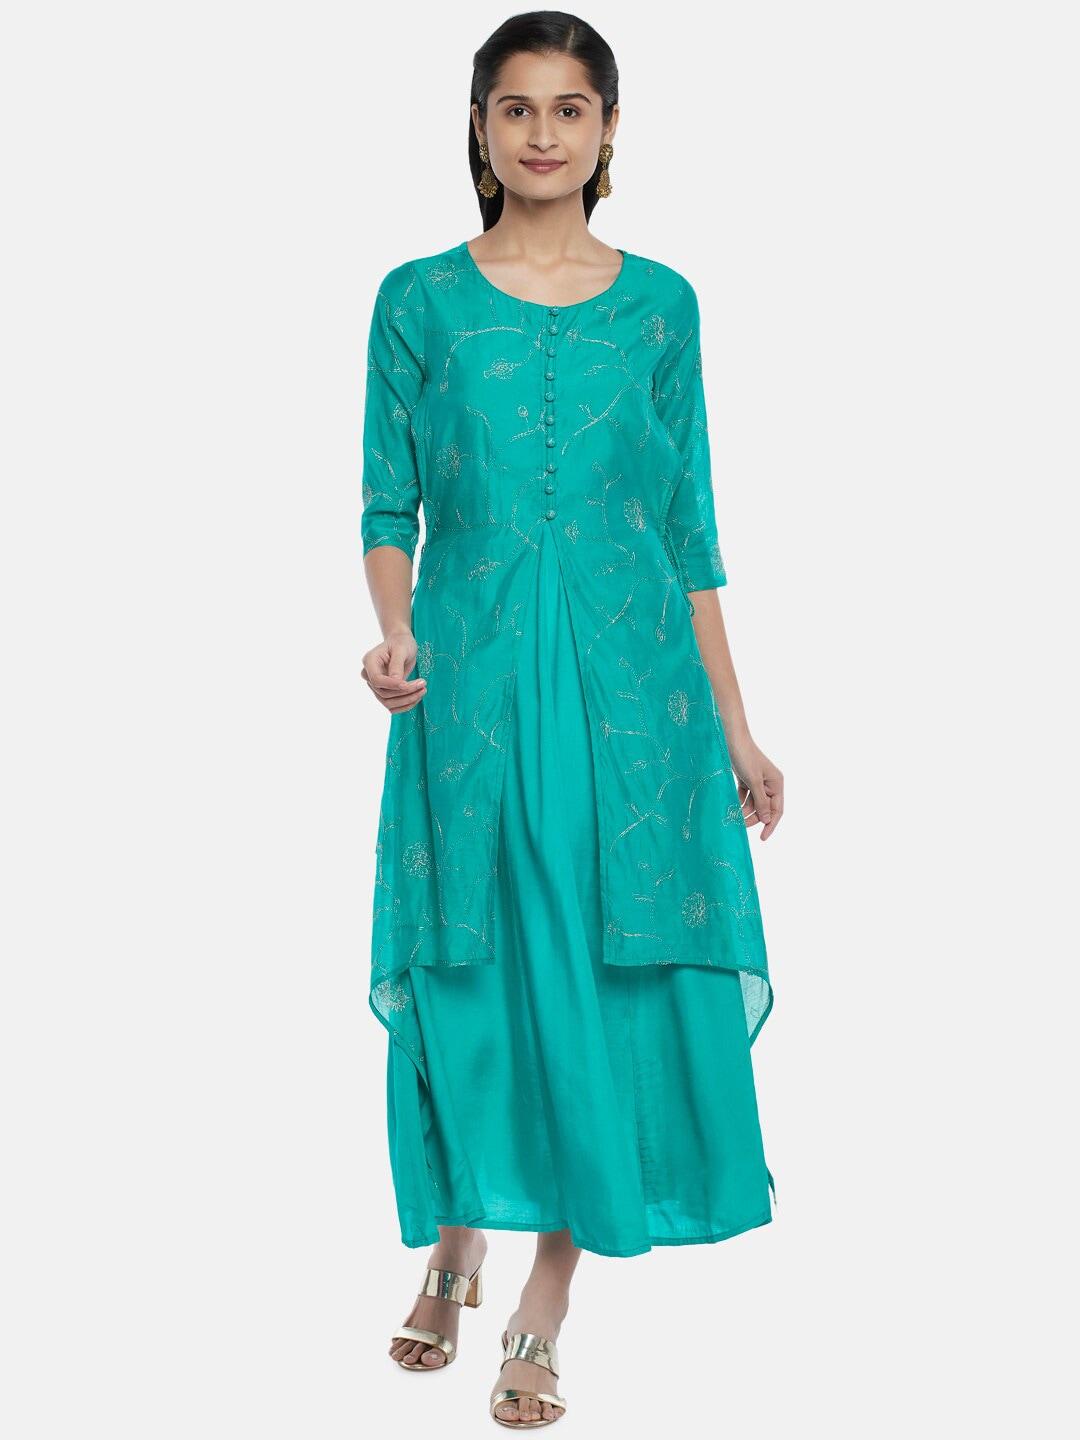 RANGMANCH BY PANTALOONS Turquoise Blue Embellished Embroidered Midi Dress